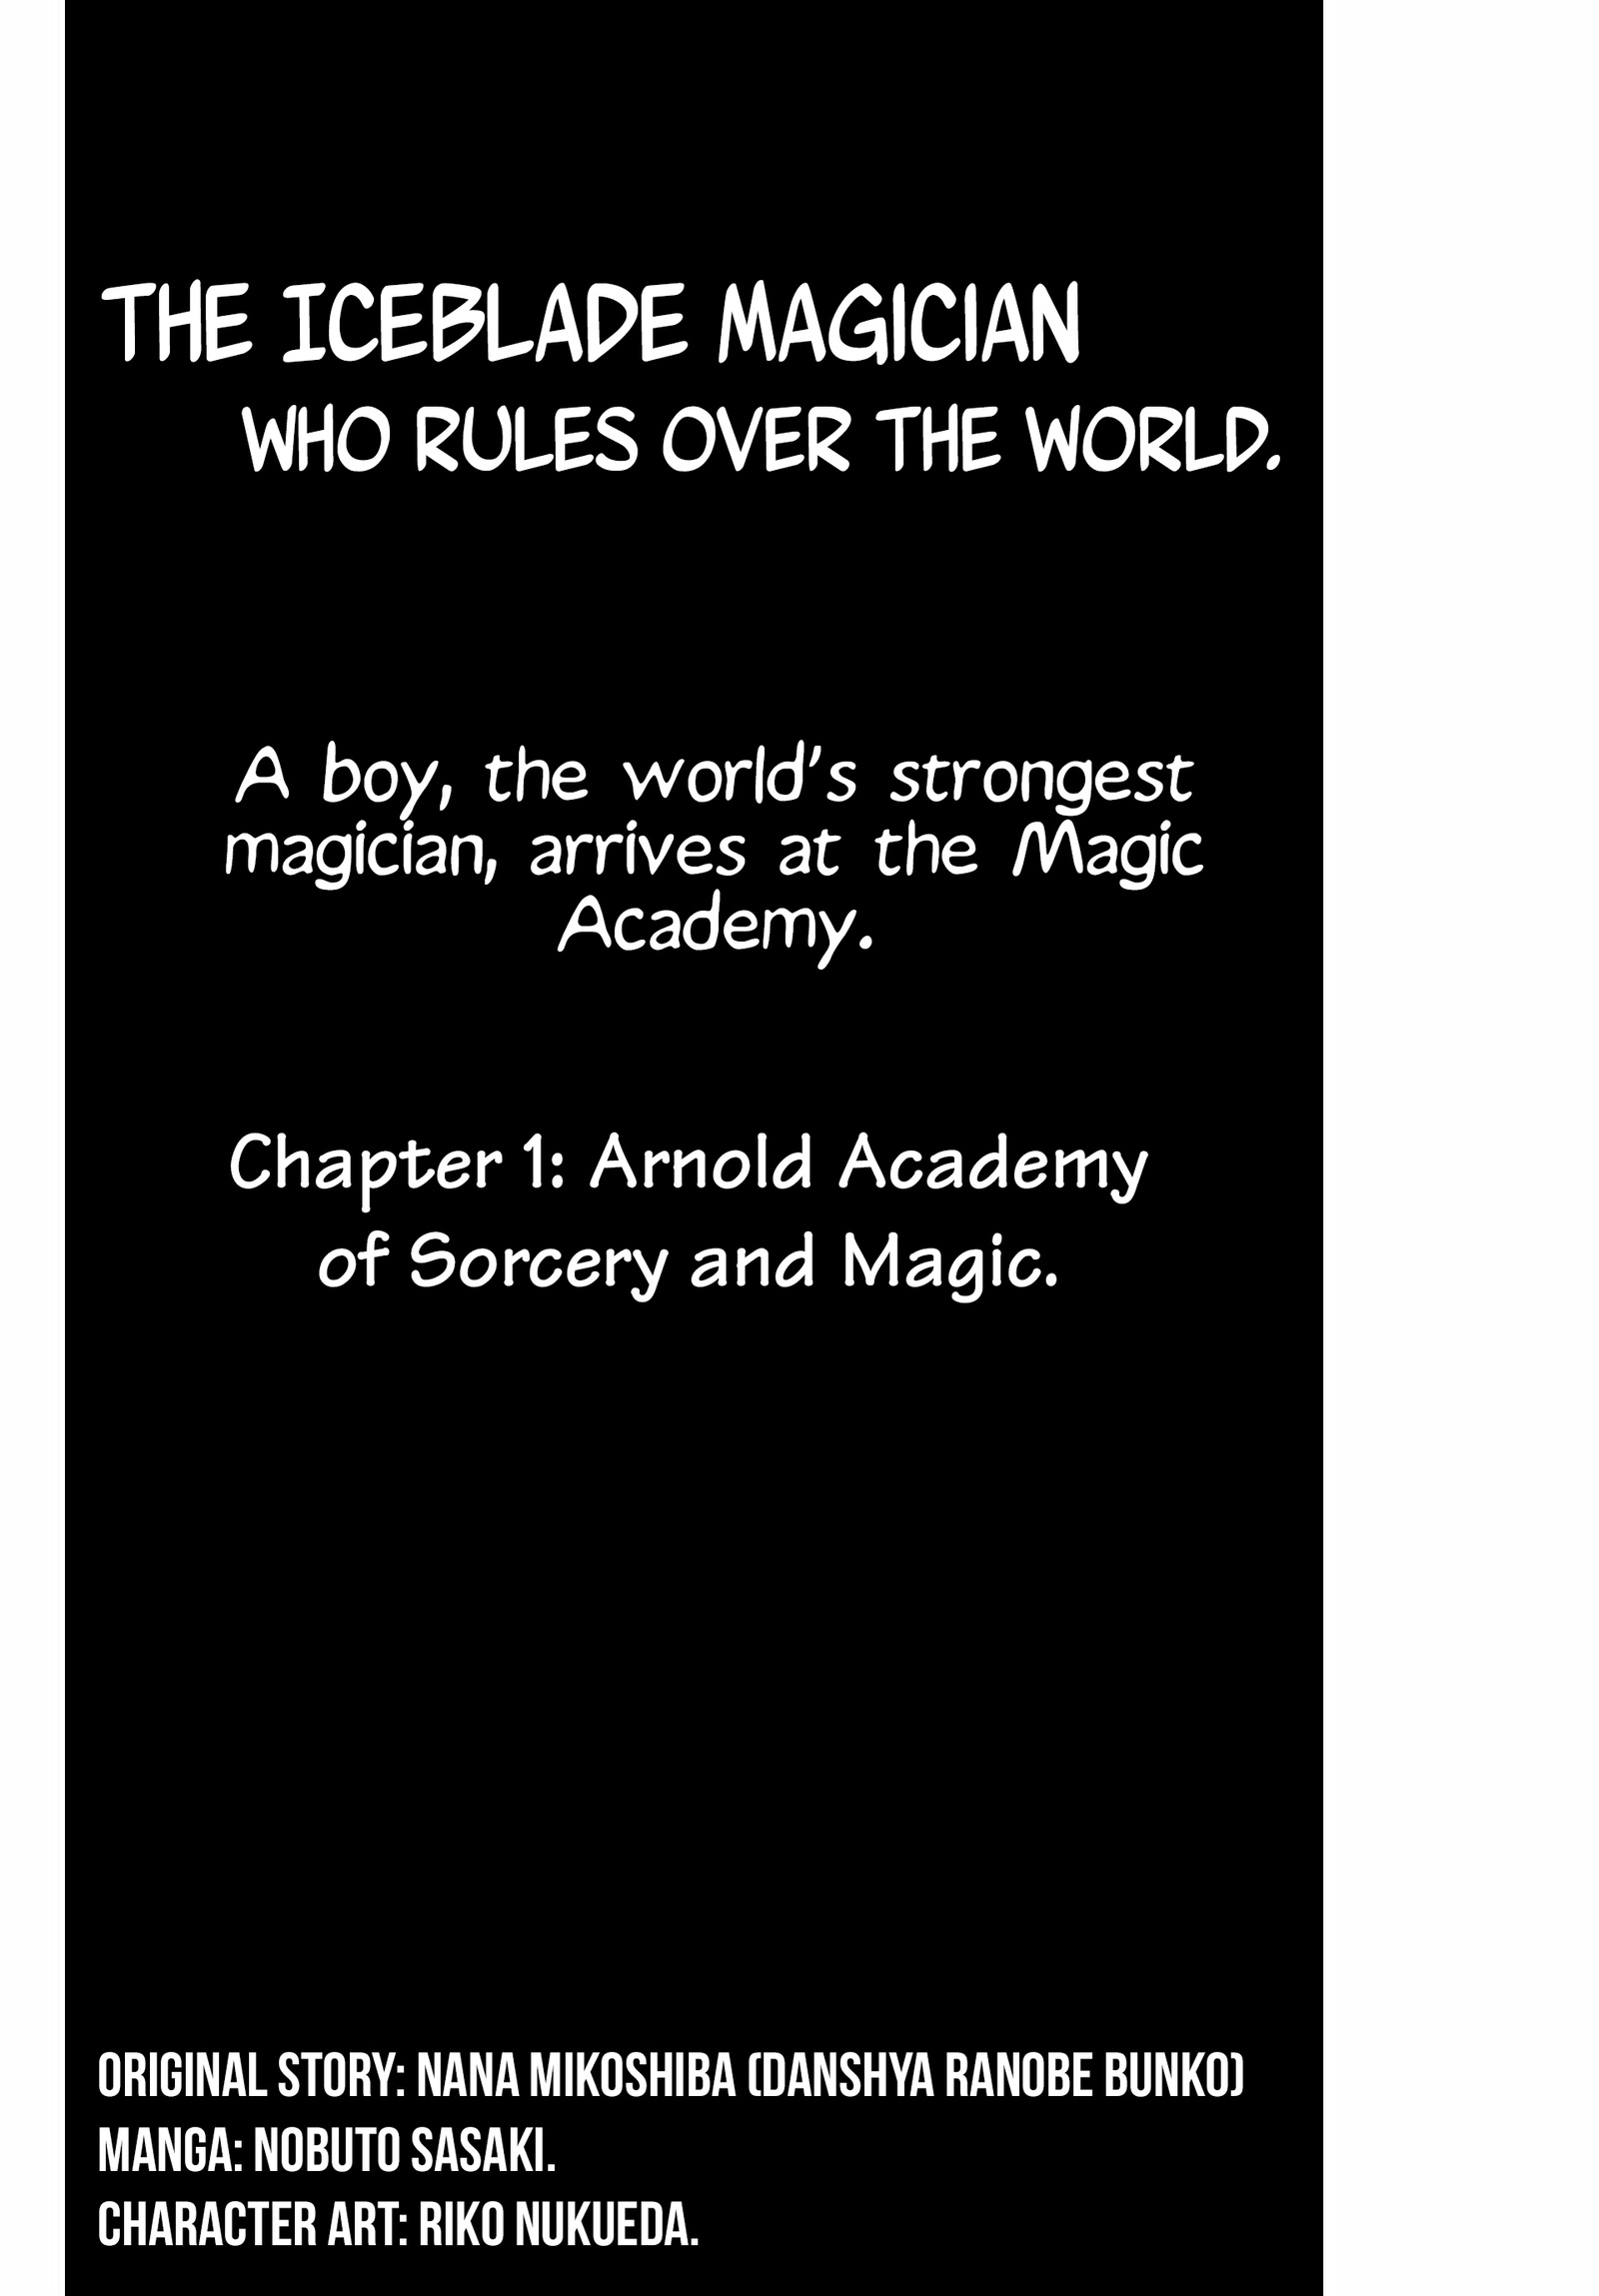 The Iceblade Magician Rules Over The World vol.1 ch.1